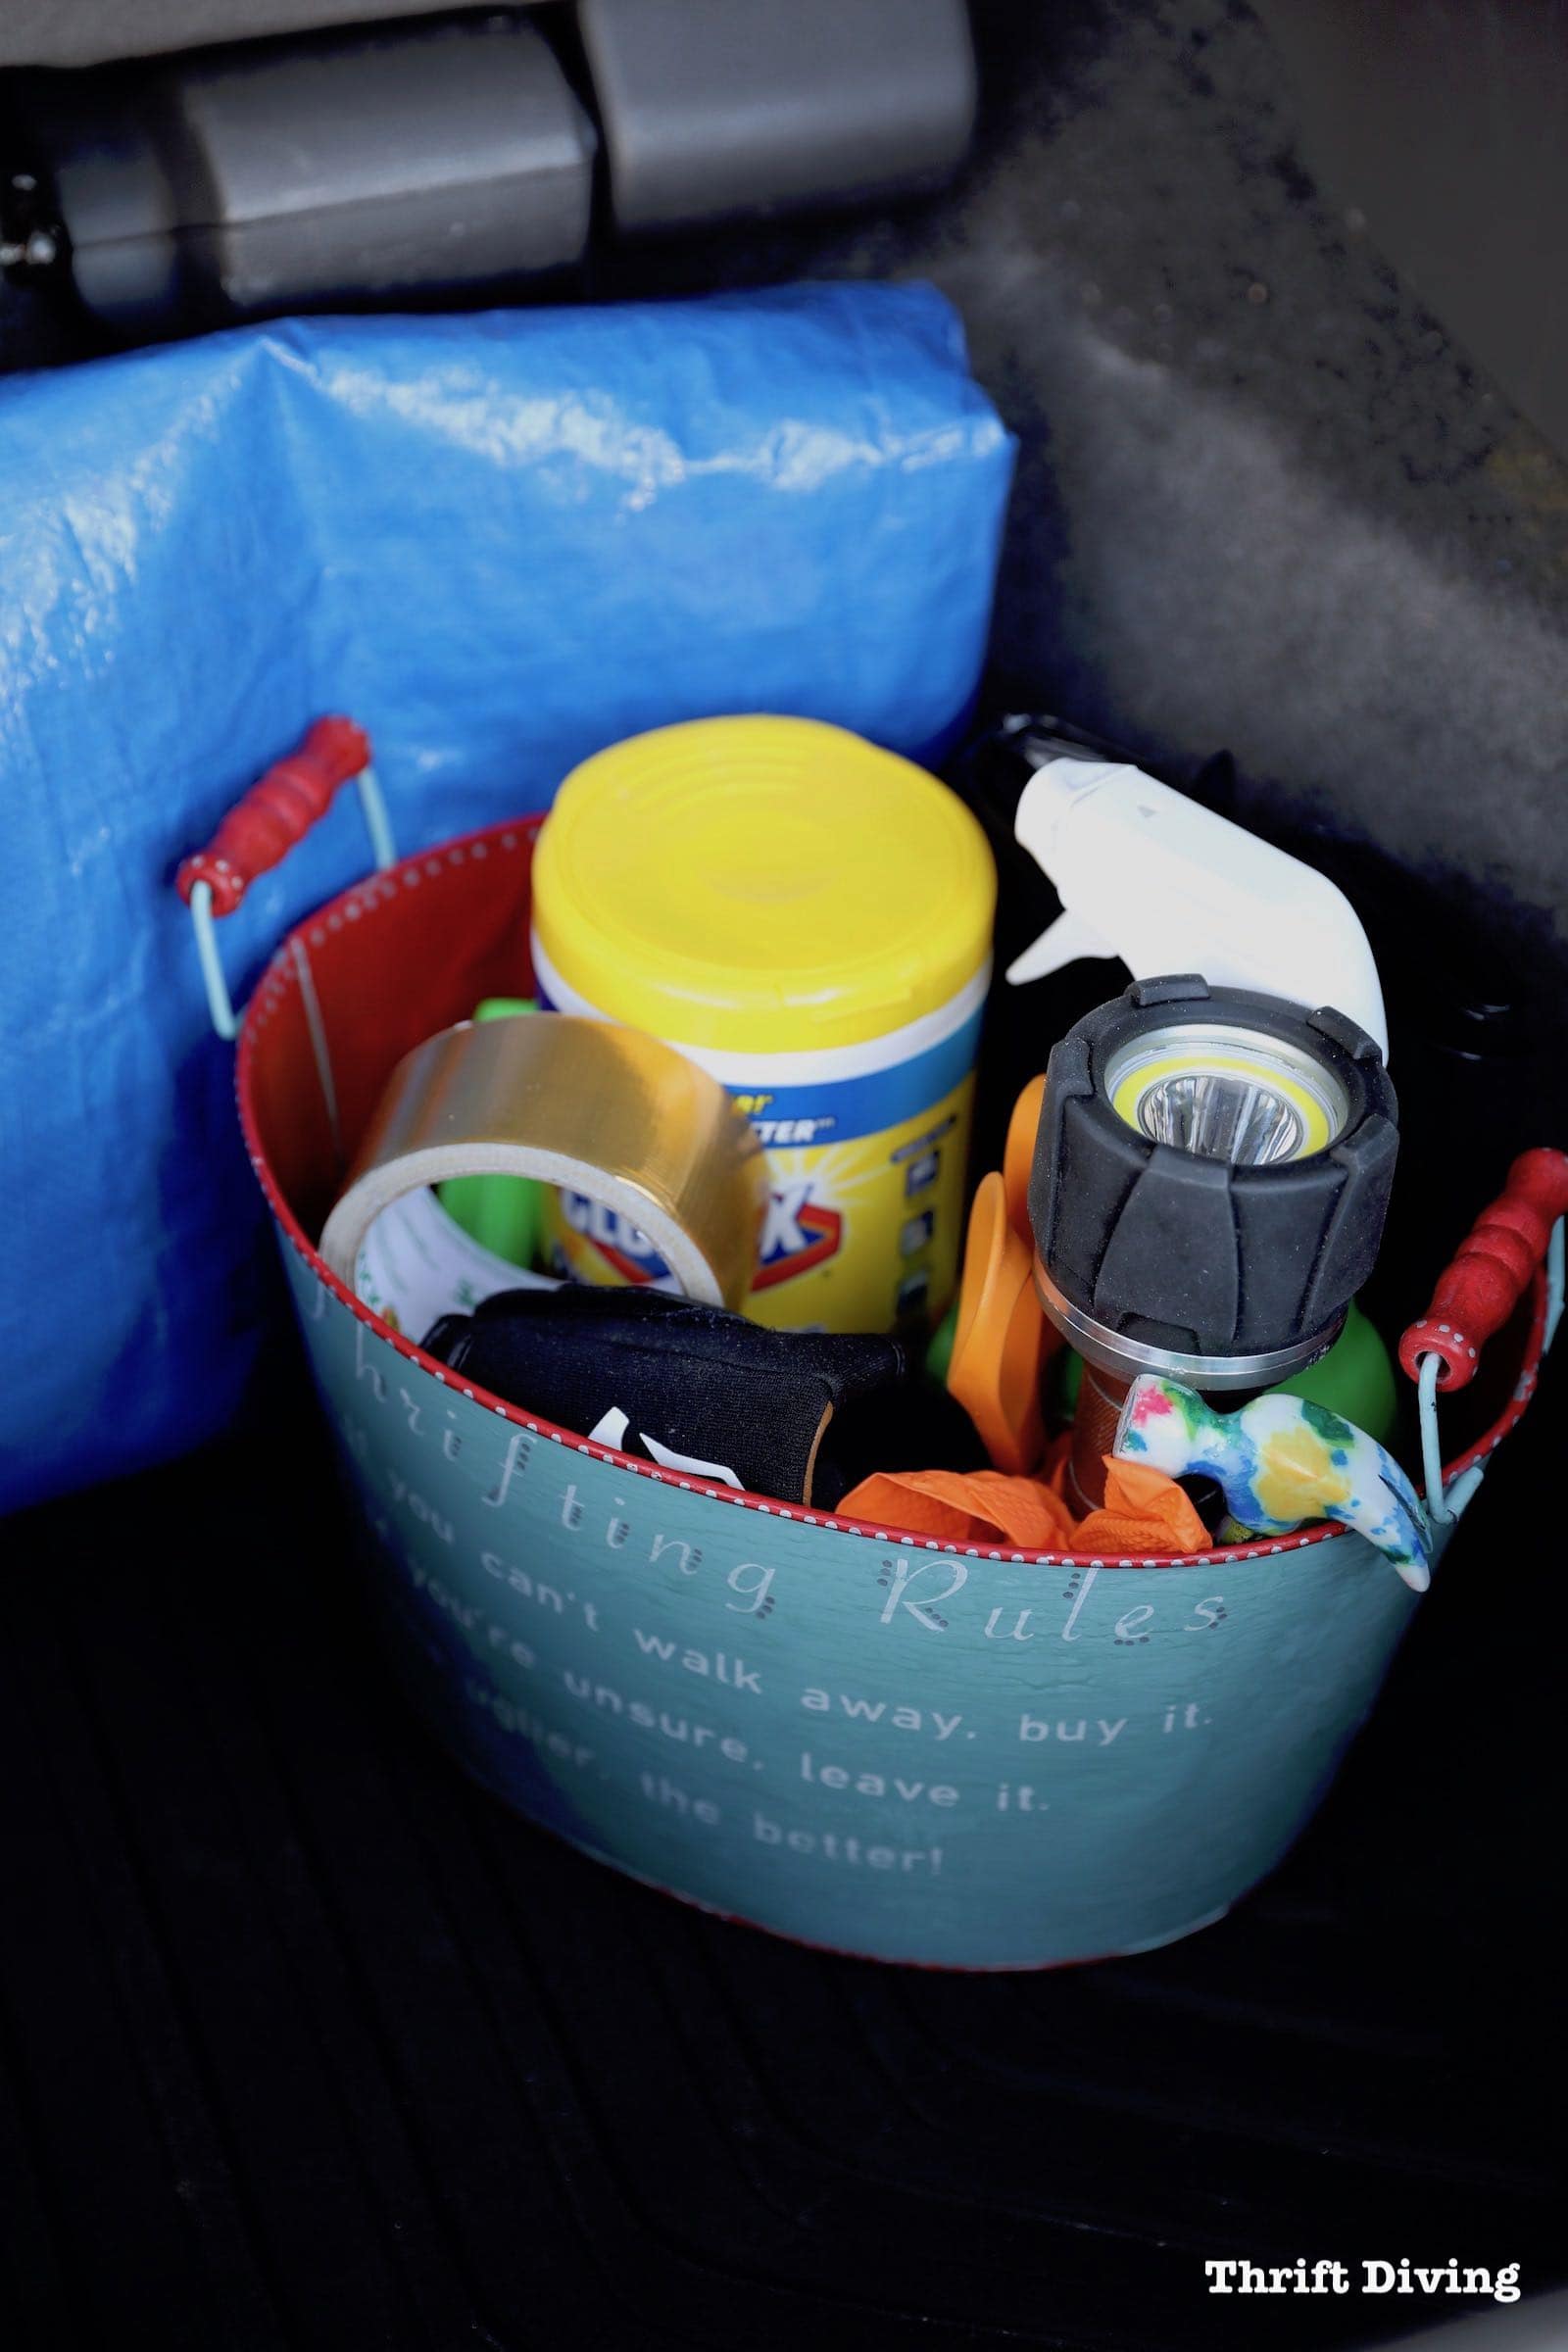 How to Make a Thrifting Survival Kit for your Trunk - Keep a thrifting survival kit in your trunk. - Thrift Diving